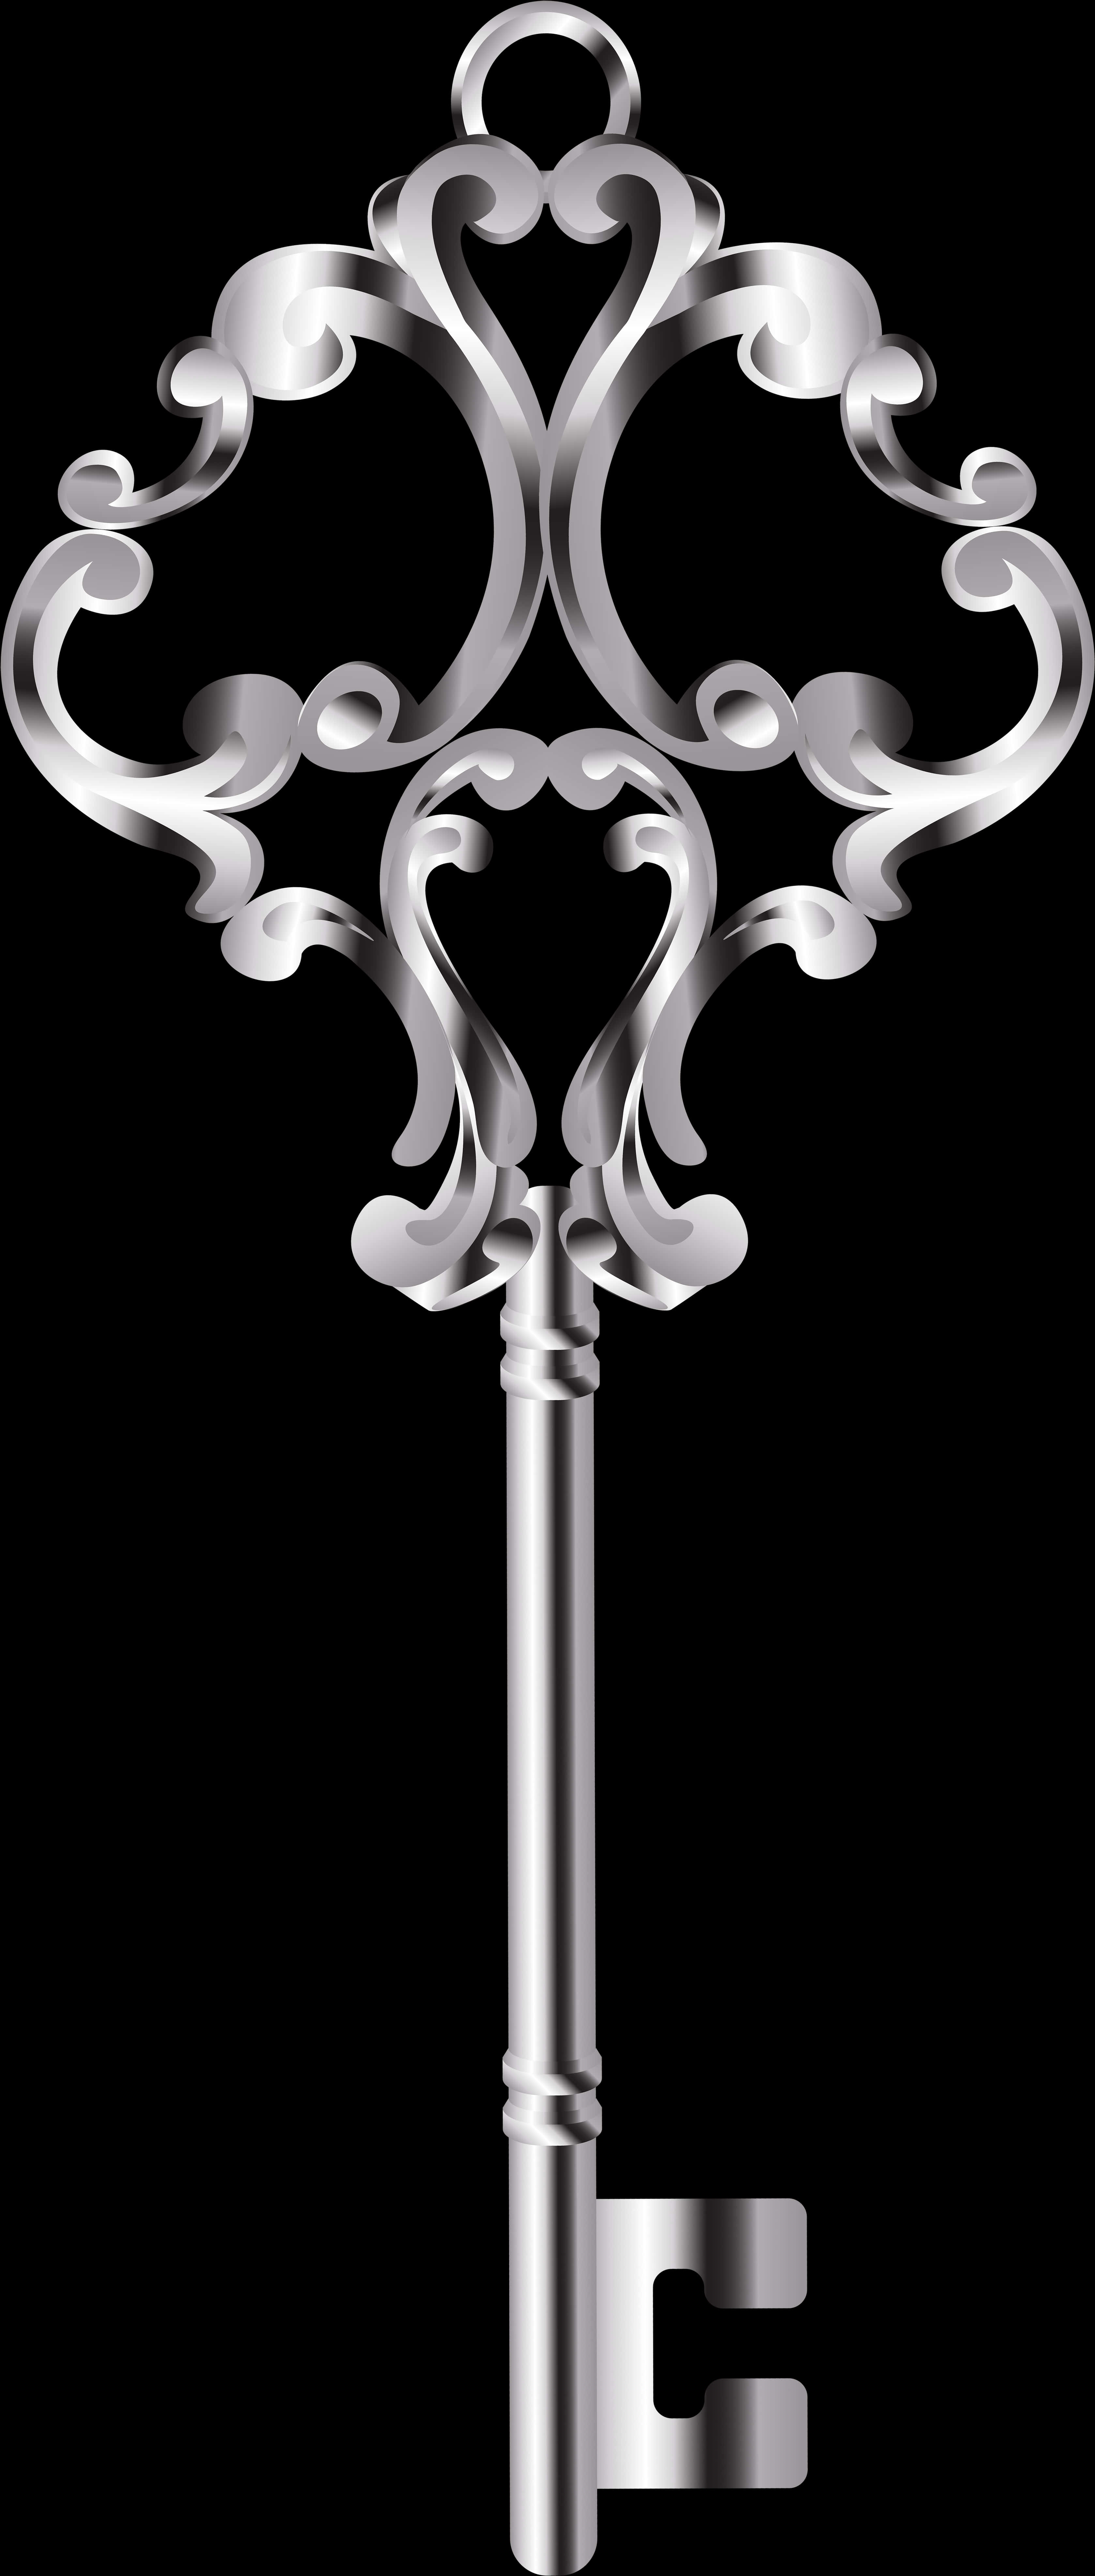 A Silver Key With A Black Background